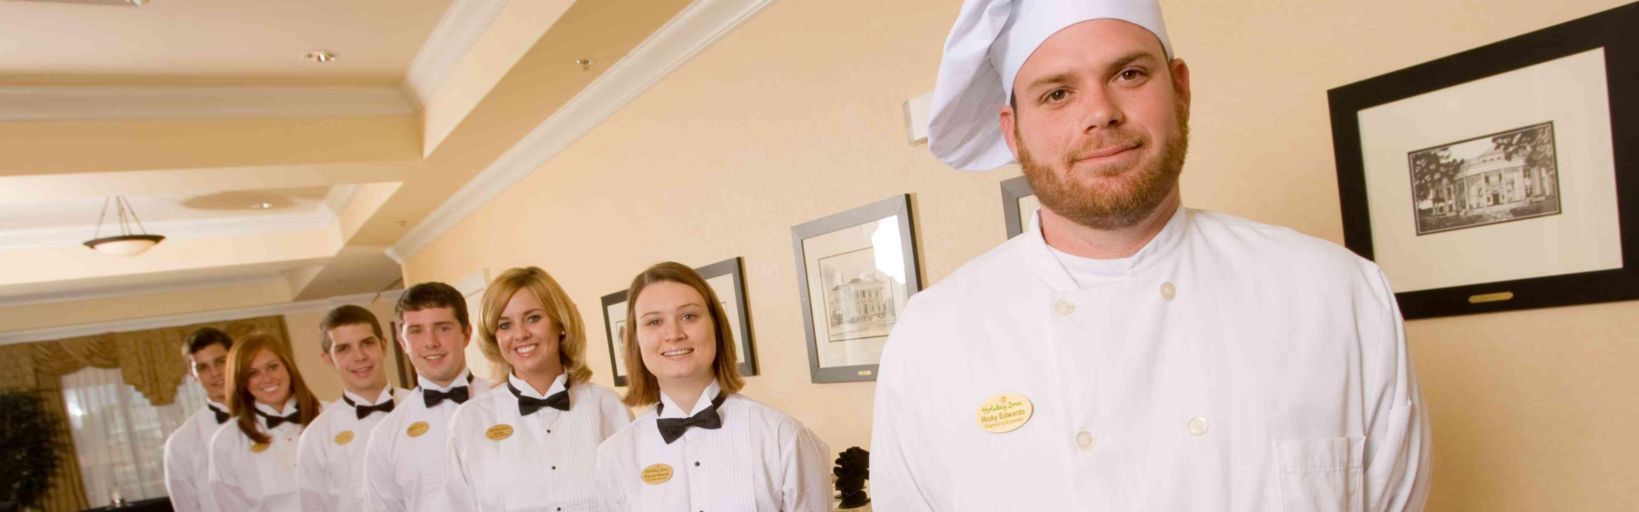 A chef with staff at the Holiday Inn and Conference Center in Valdosta, GA.